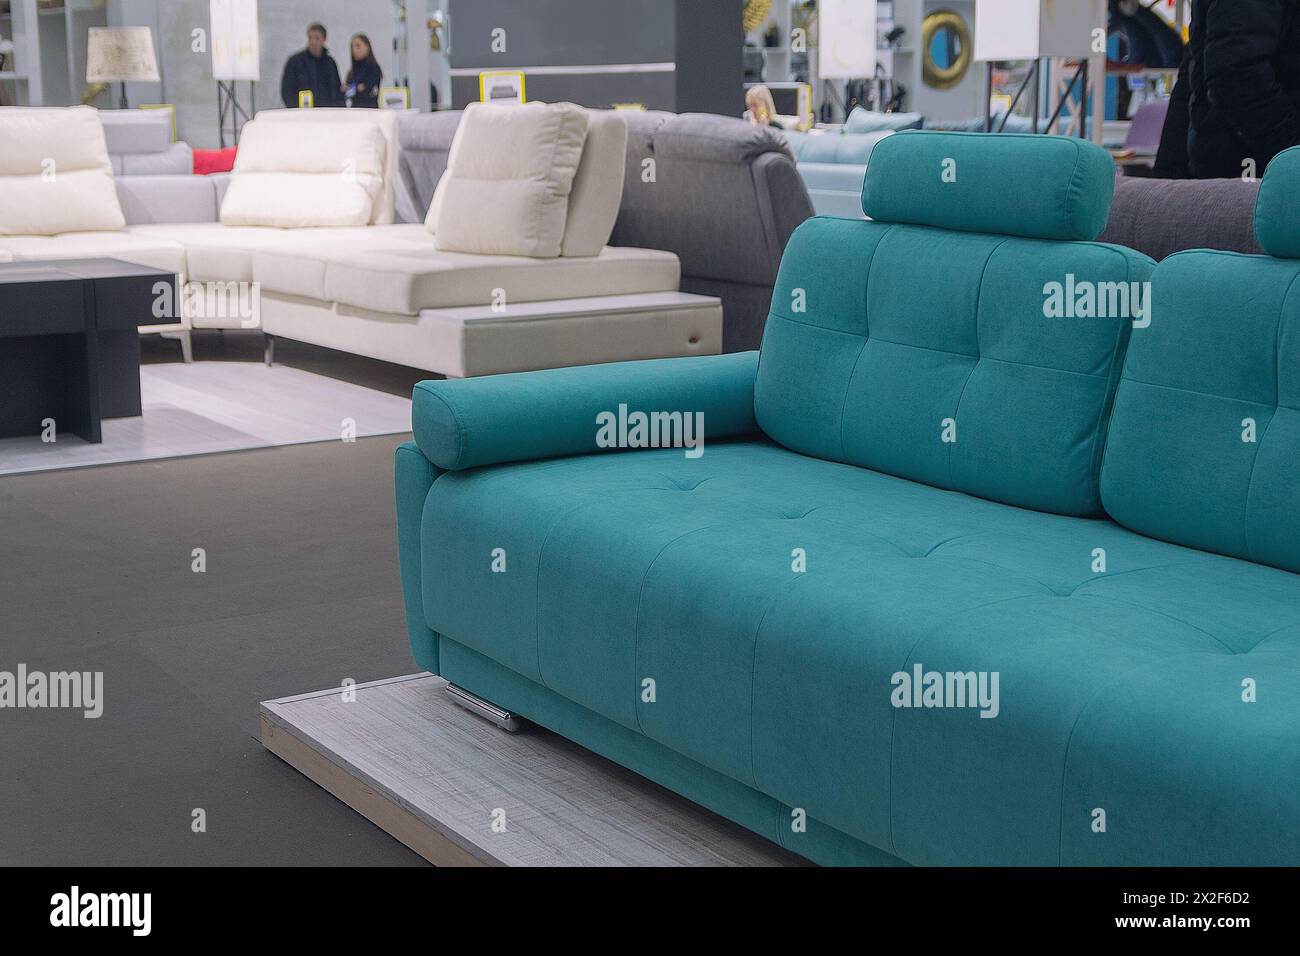 Modern sofas in the showroom of a furniture store. Industry Stock Photo